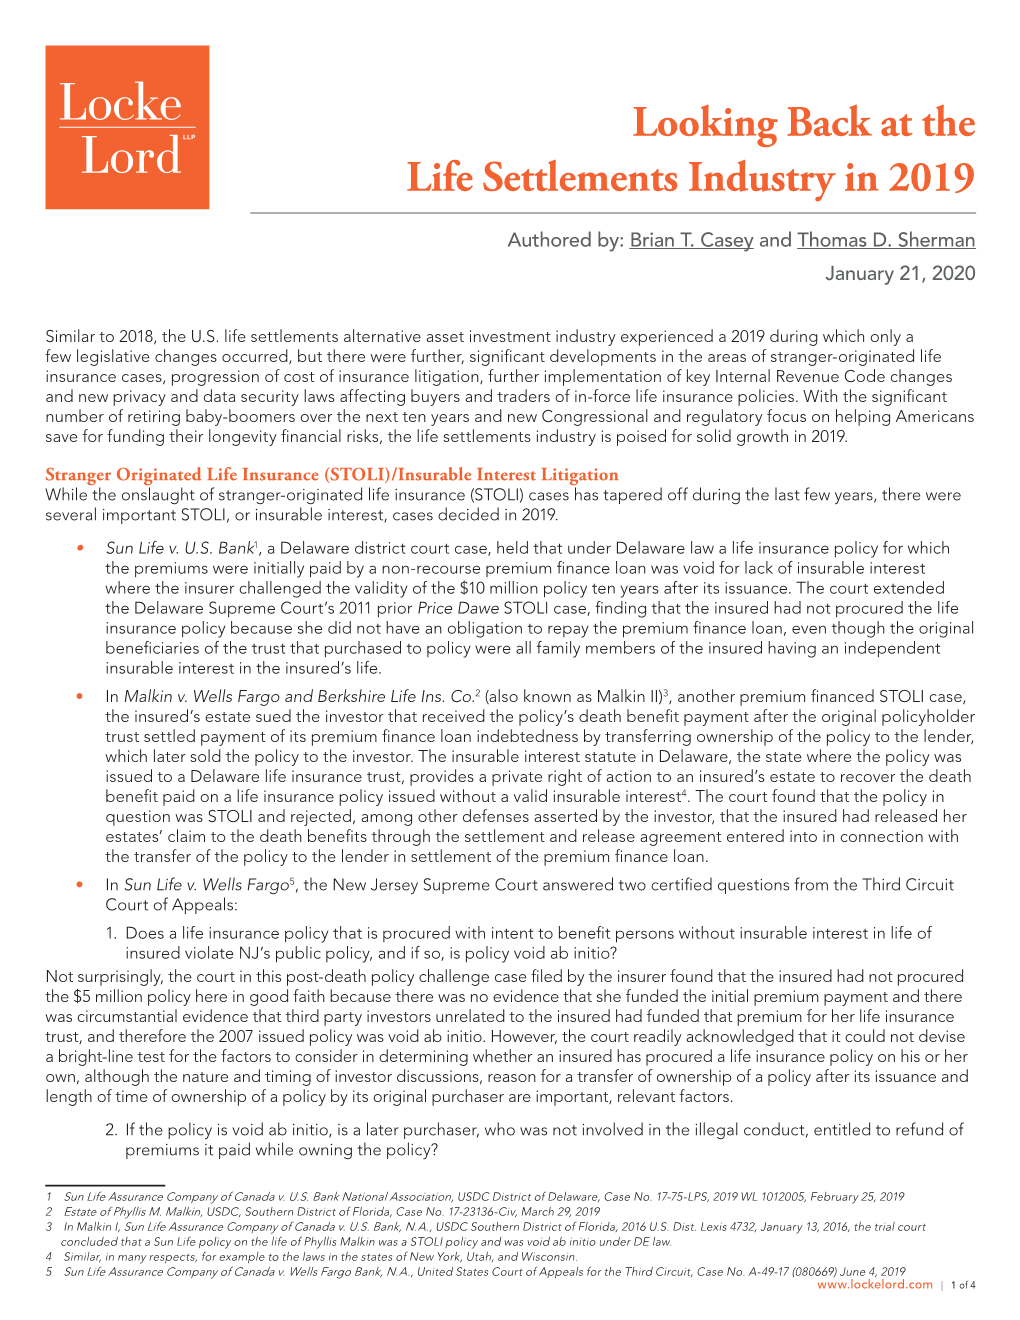 Looking Back at the Life Settlements Industry in 2019